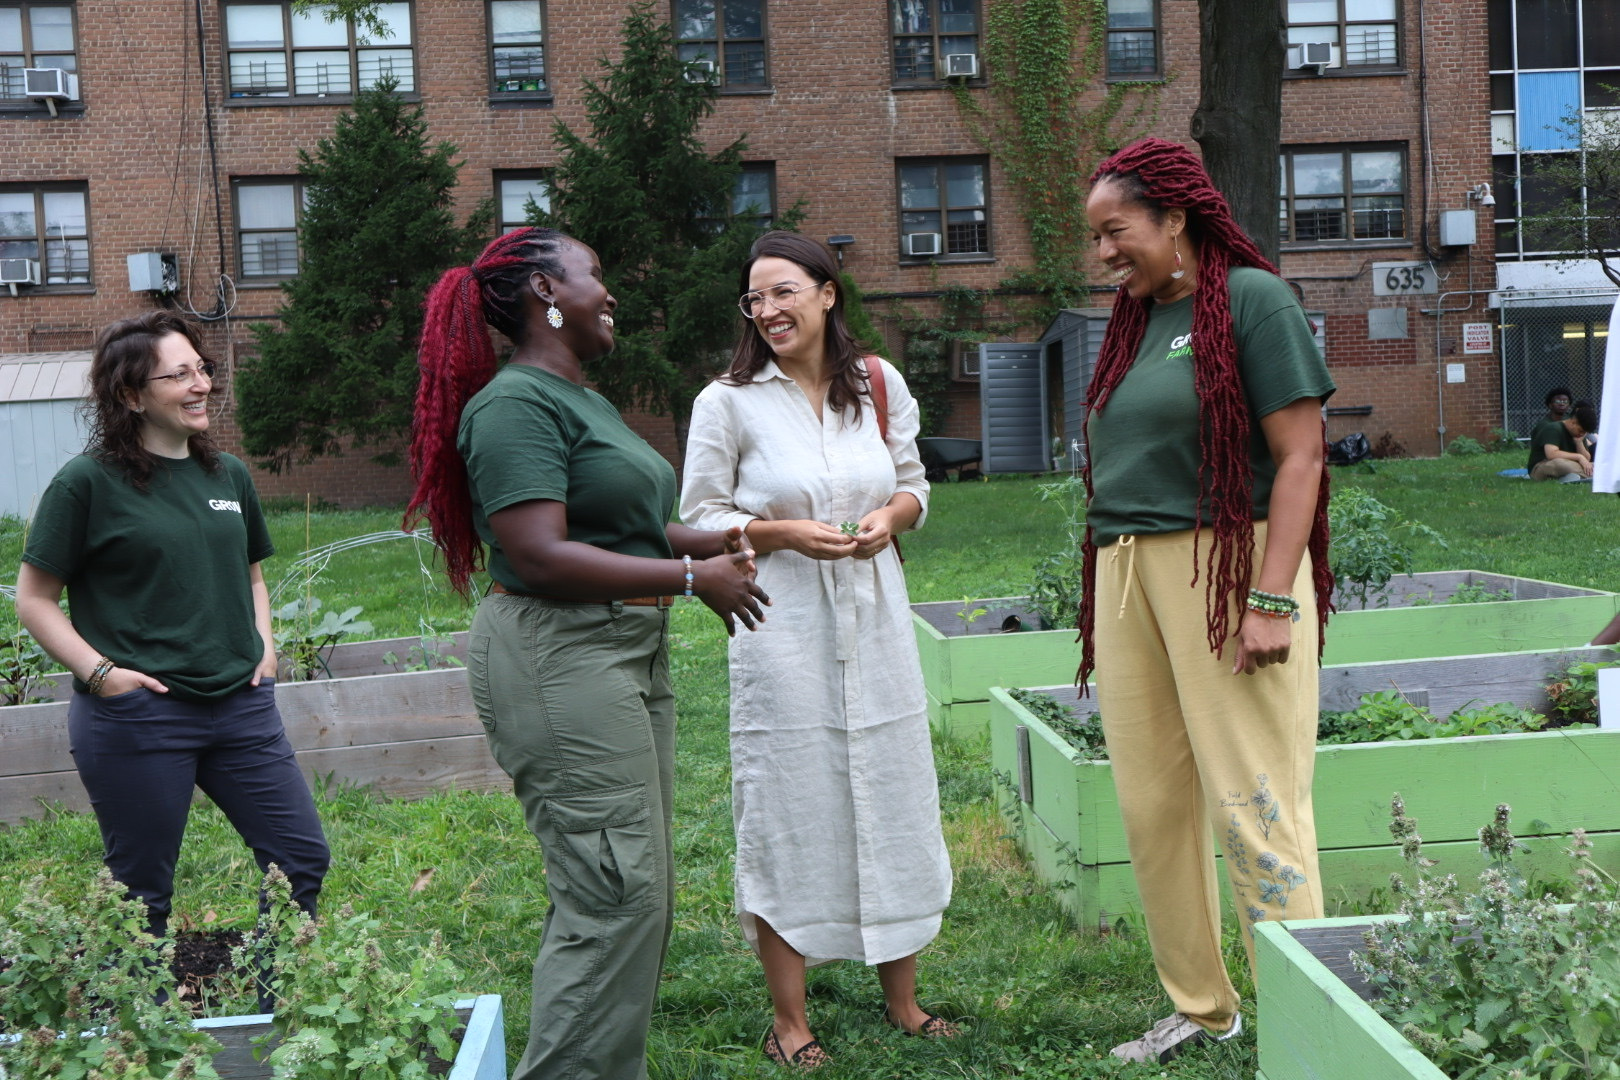 Rep. AOC laughs with 3 constituents in a community garden